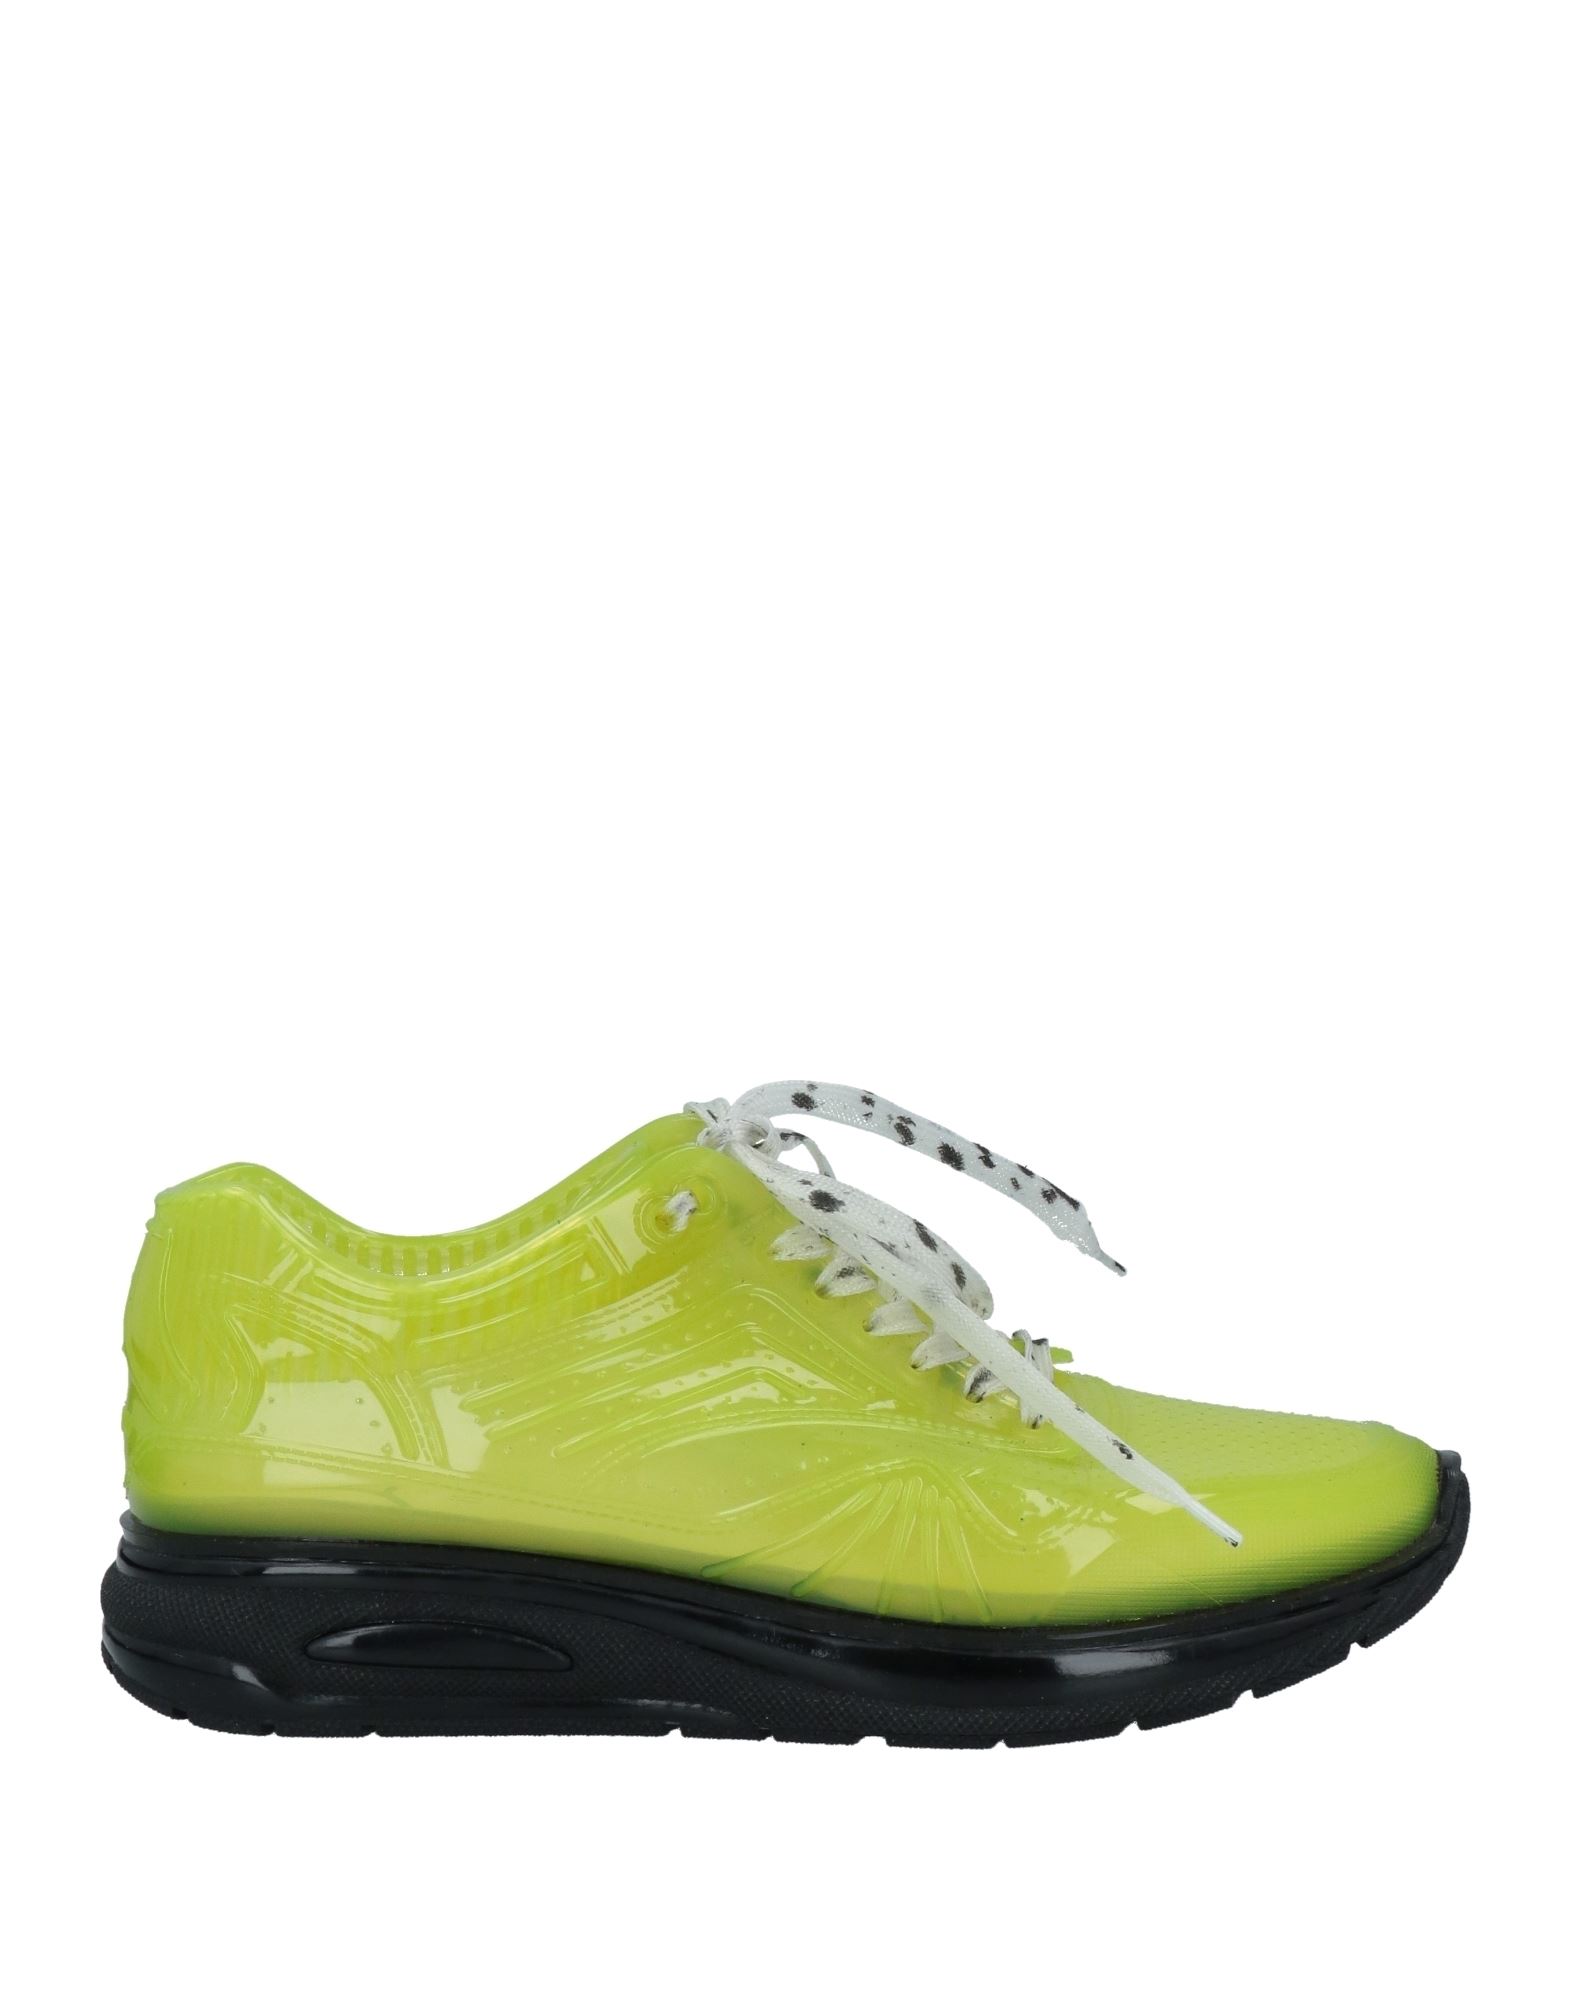 Airdp By Ishu+ Sneakers In Yellow